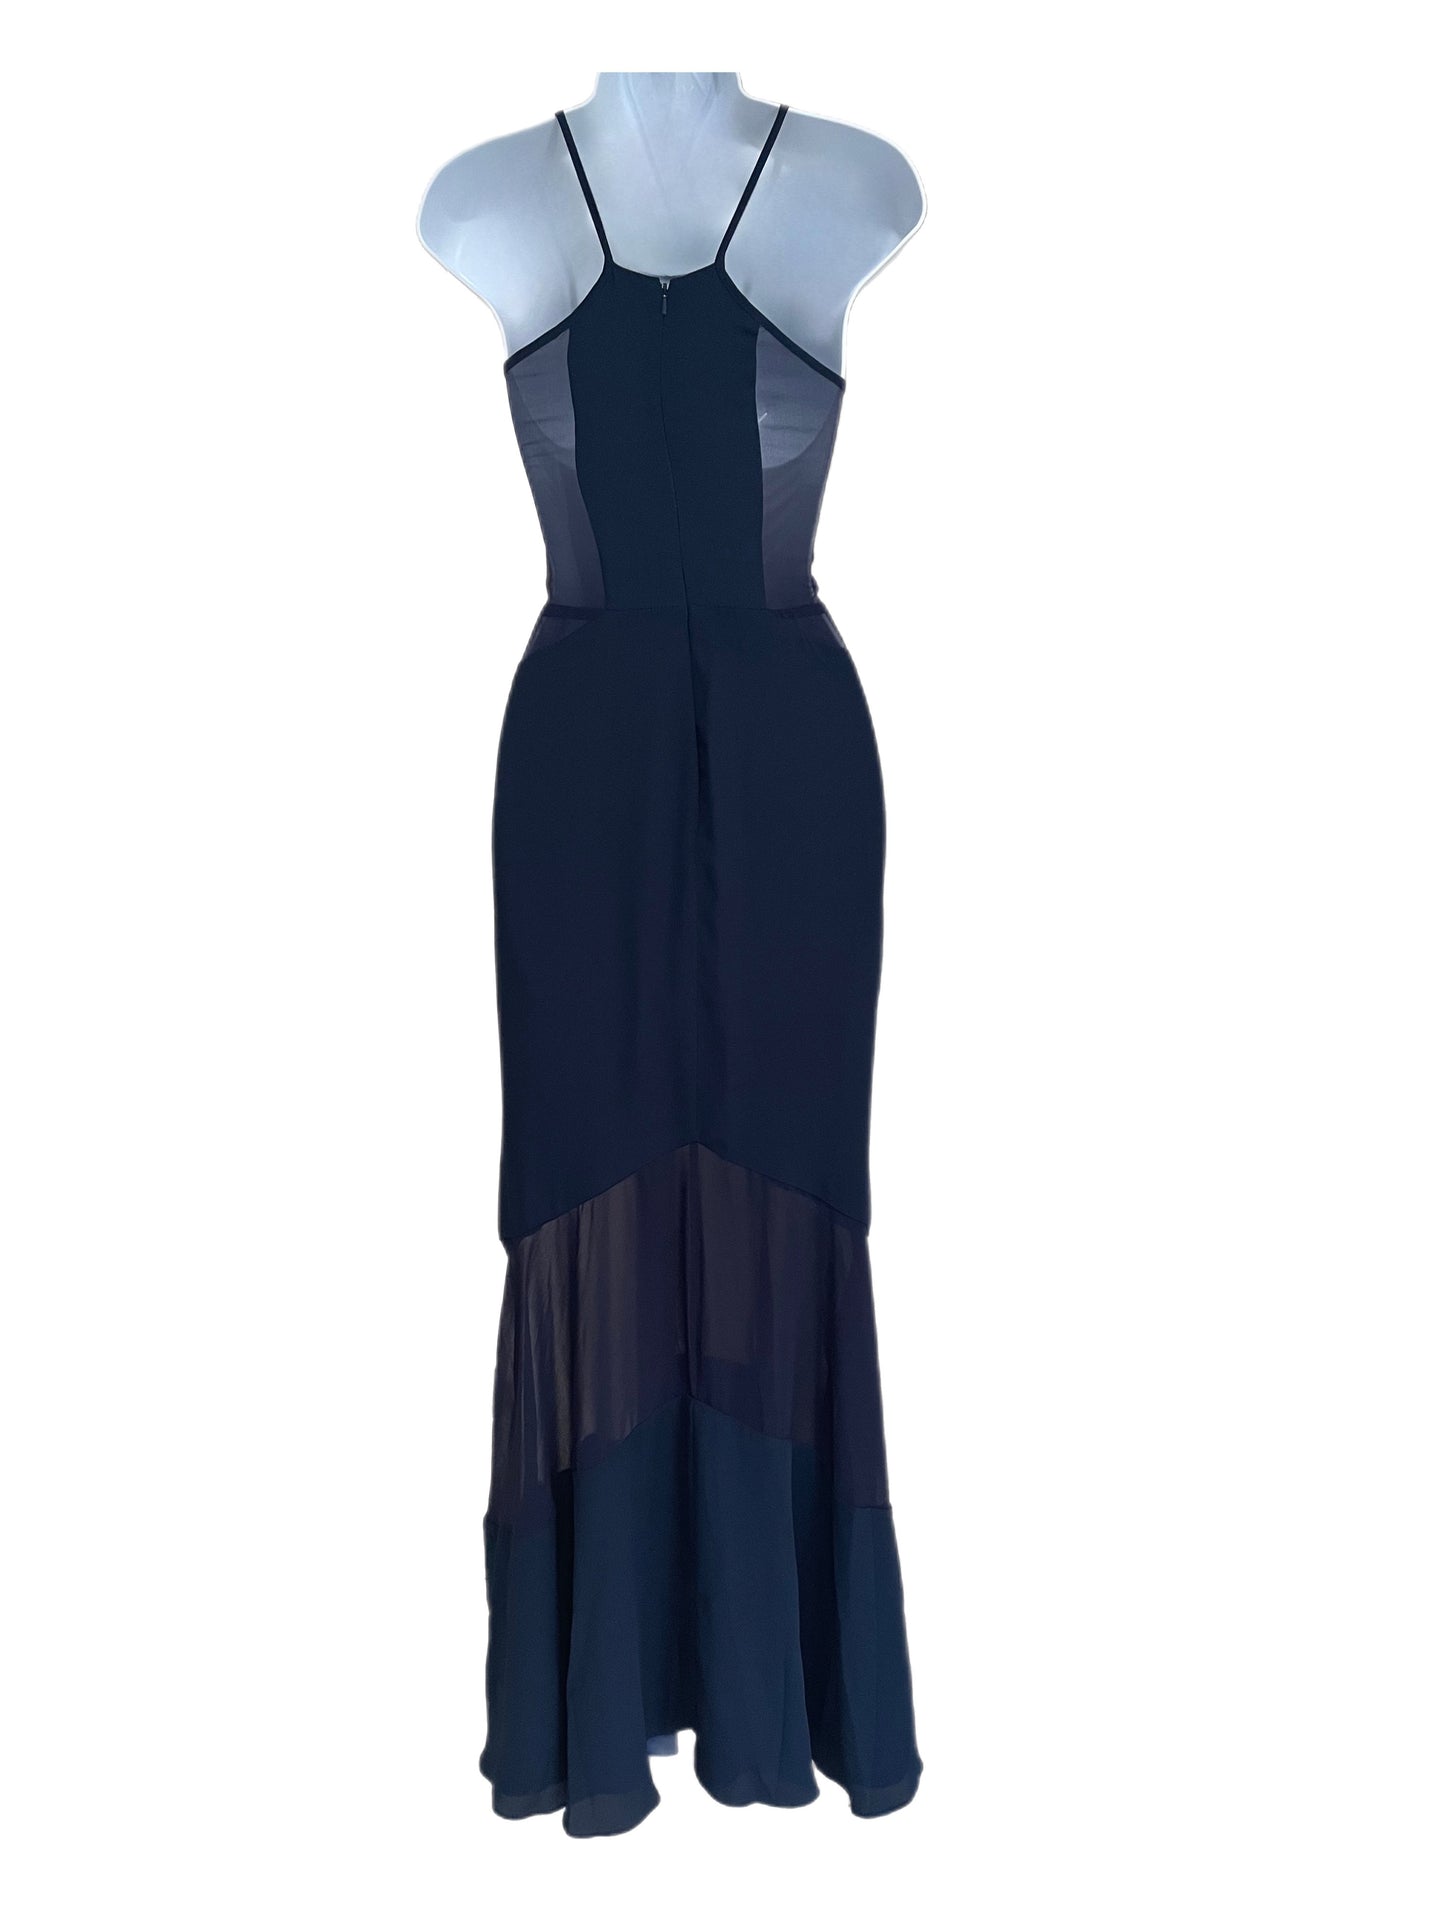 Gown-Deep V Front- Sheer Accented Design-Navy Blue Coloring- By Fame & Partners